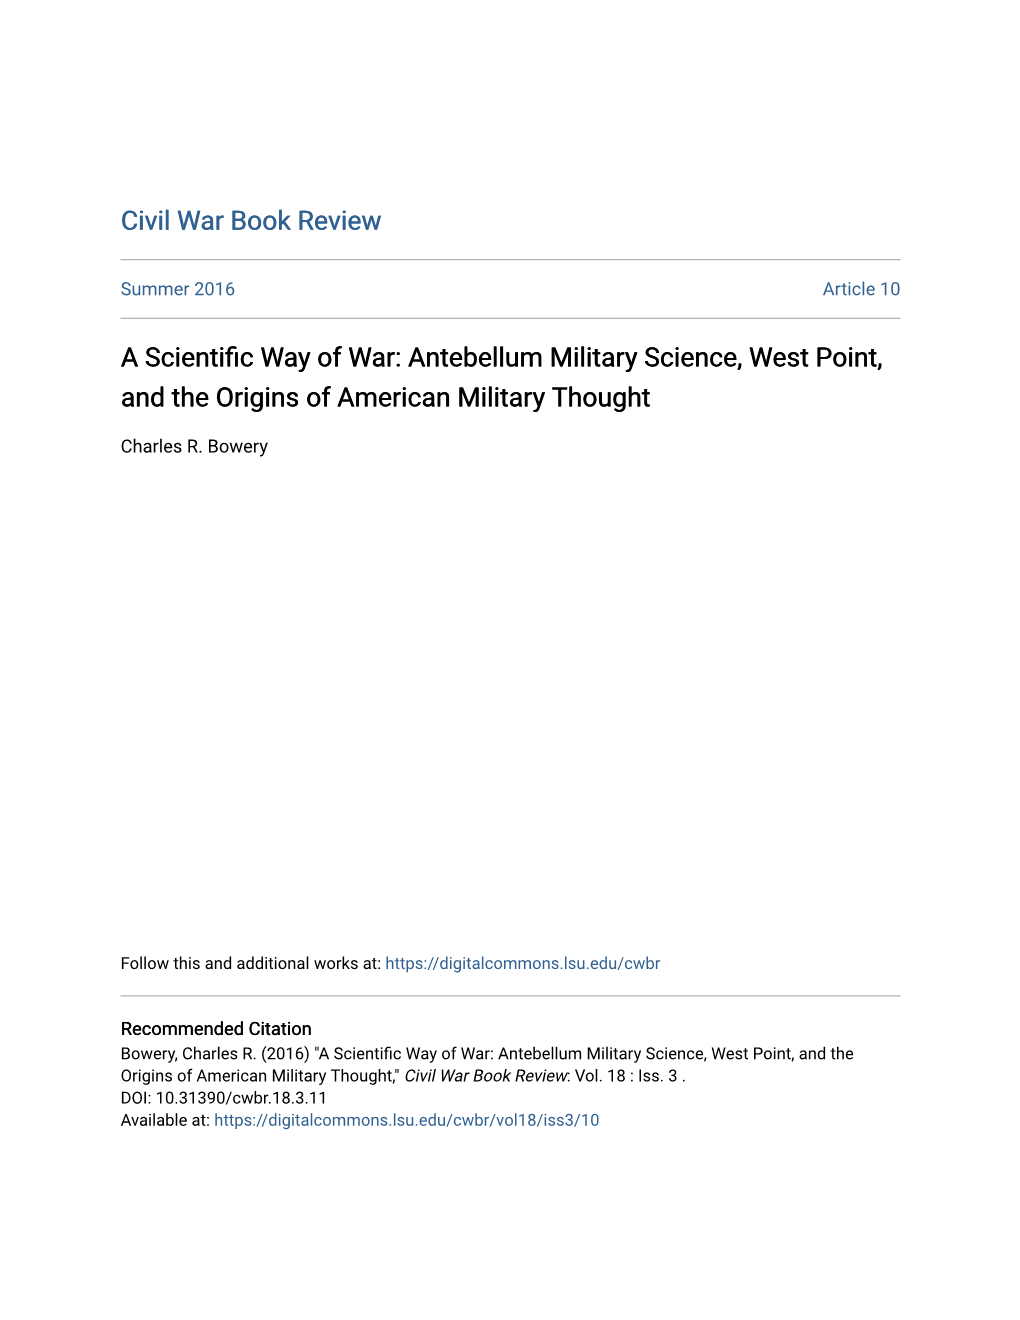 A Scientific Way of War: Antebellum Military Science, West Point, and the Origins of American Military Thought